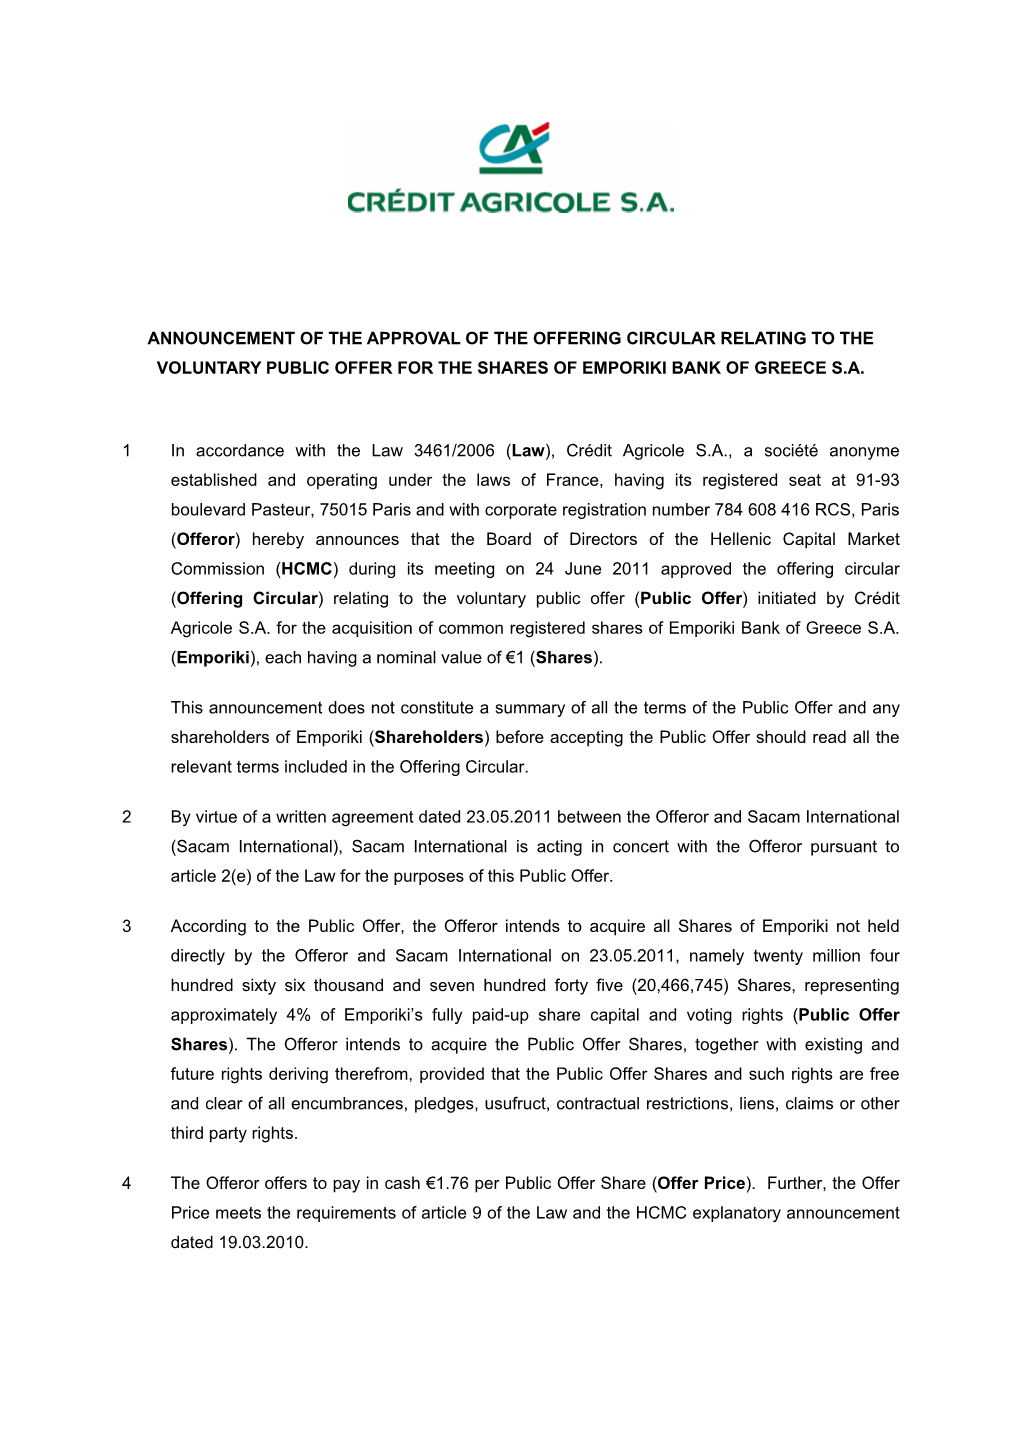 Announcement of the Approval of the Offering Circular Relating to the Voluntary Public Offer for the Shares of Emporiki Bank of Greece S.A